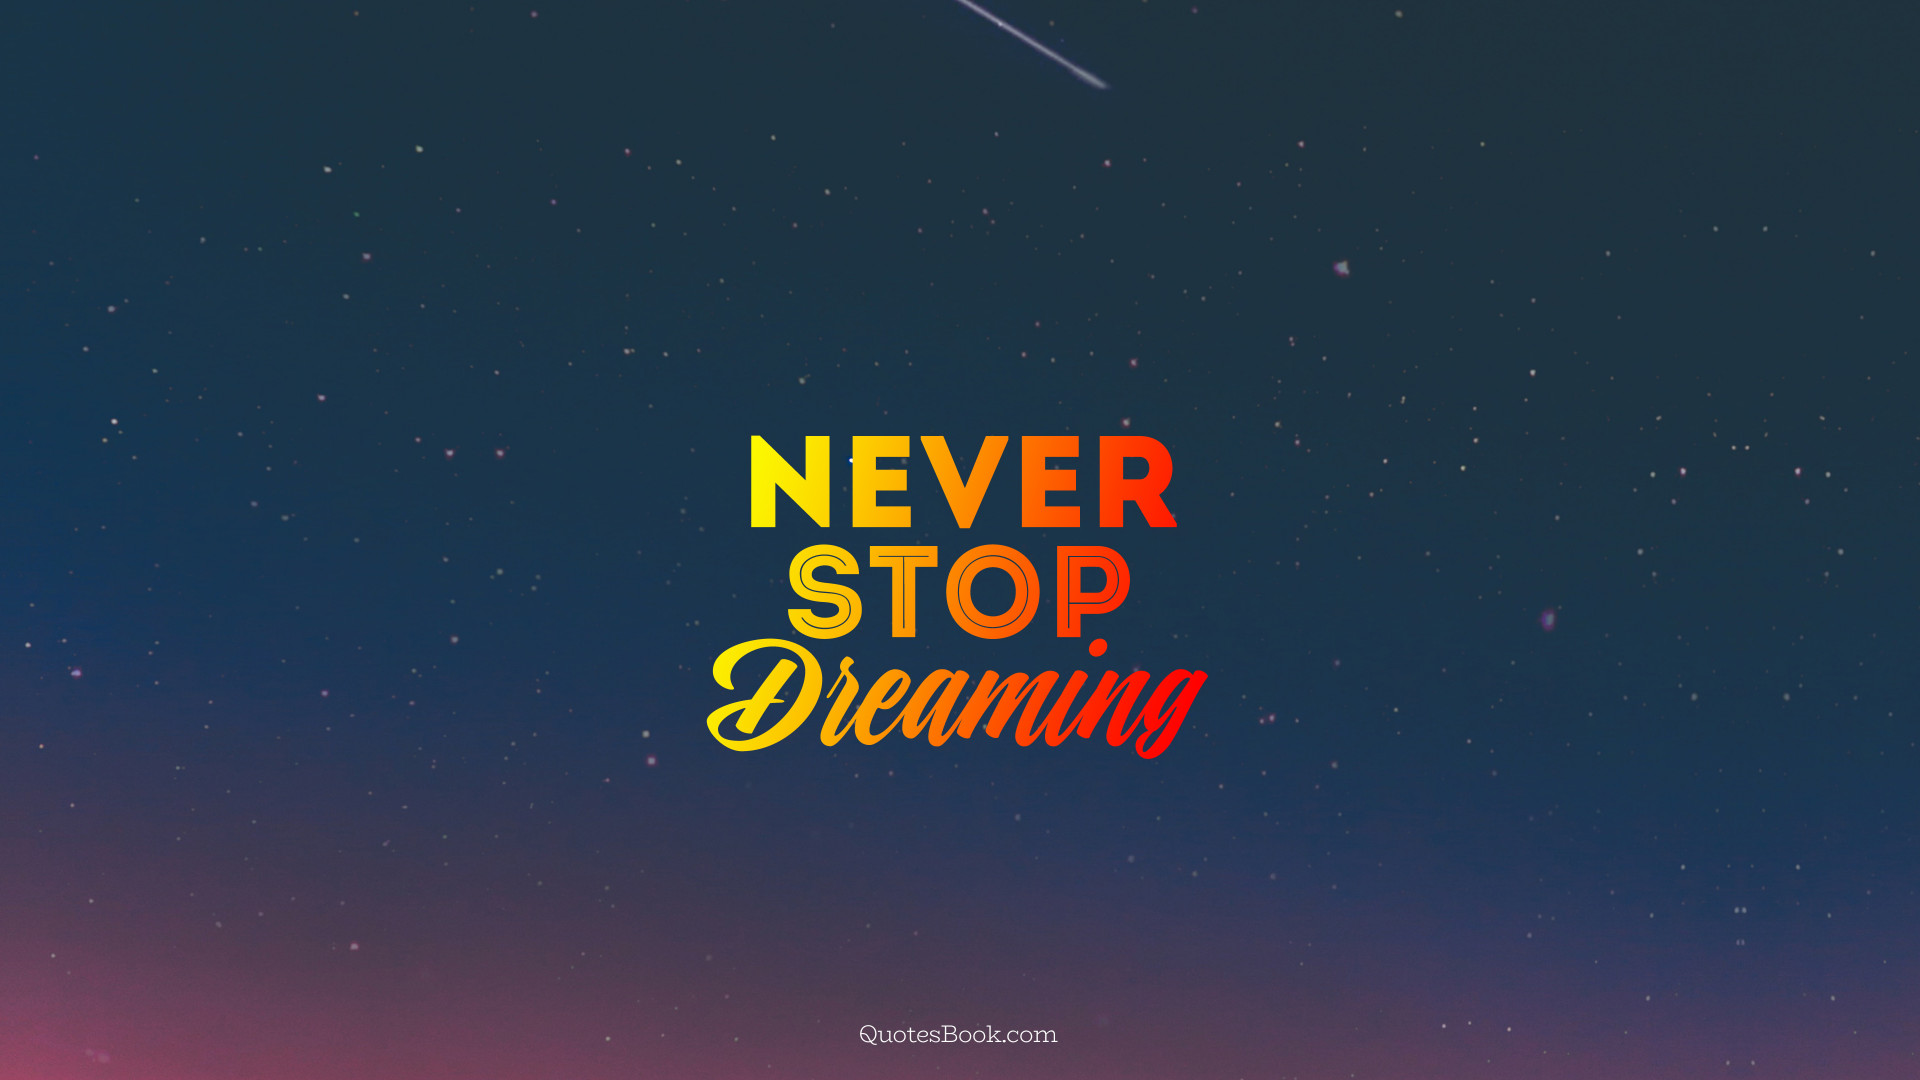 Never stop dreaming - QuotesBook